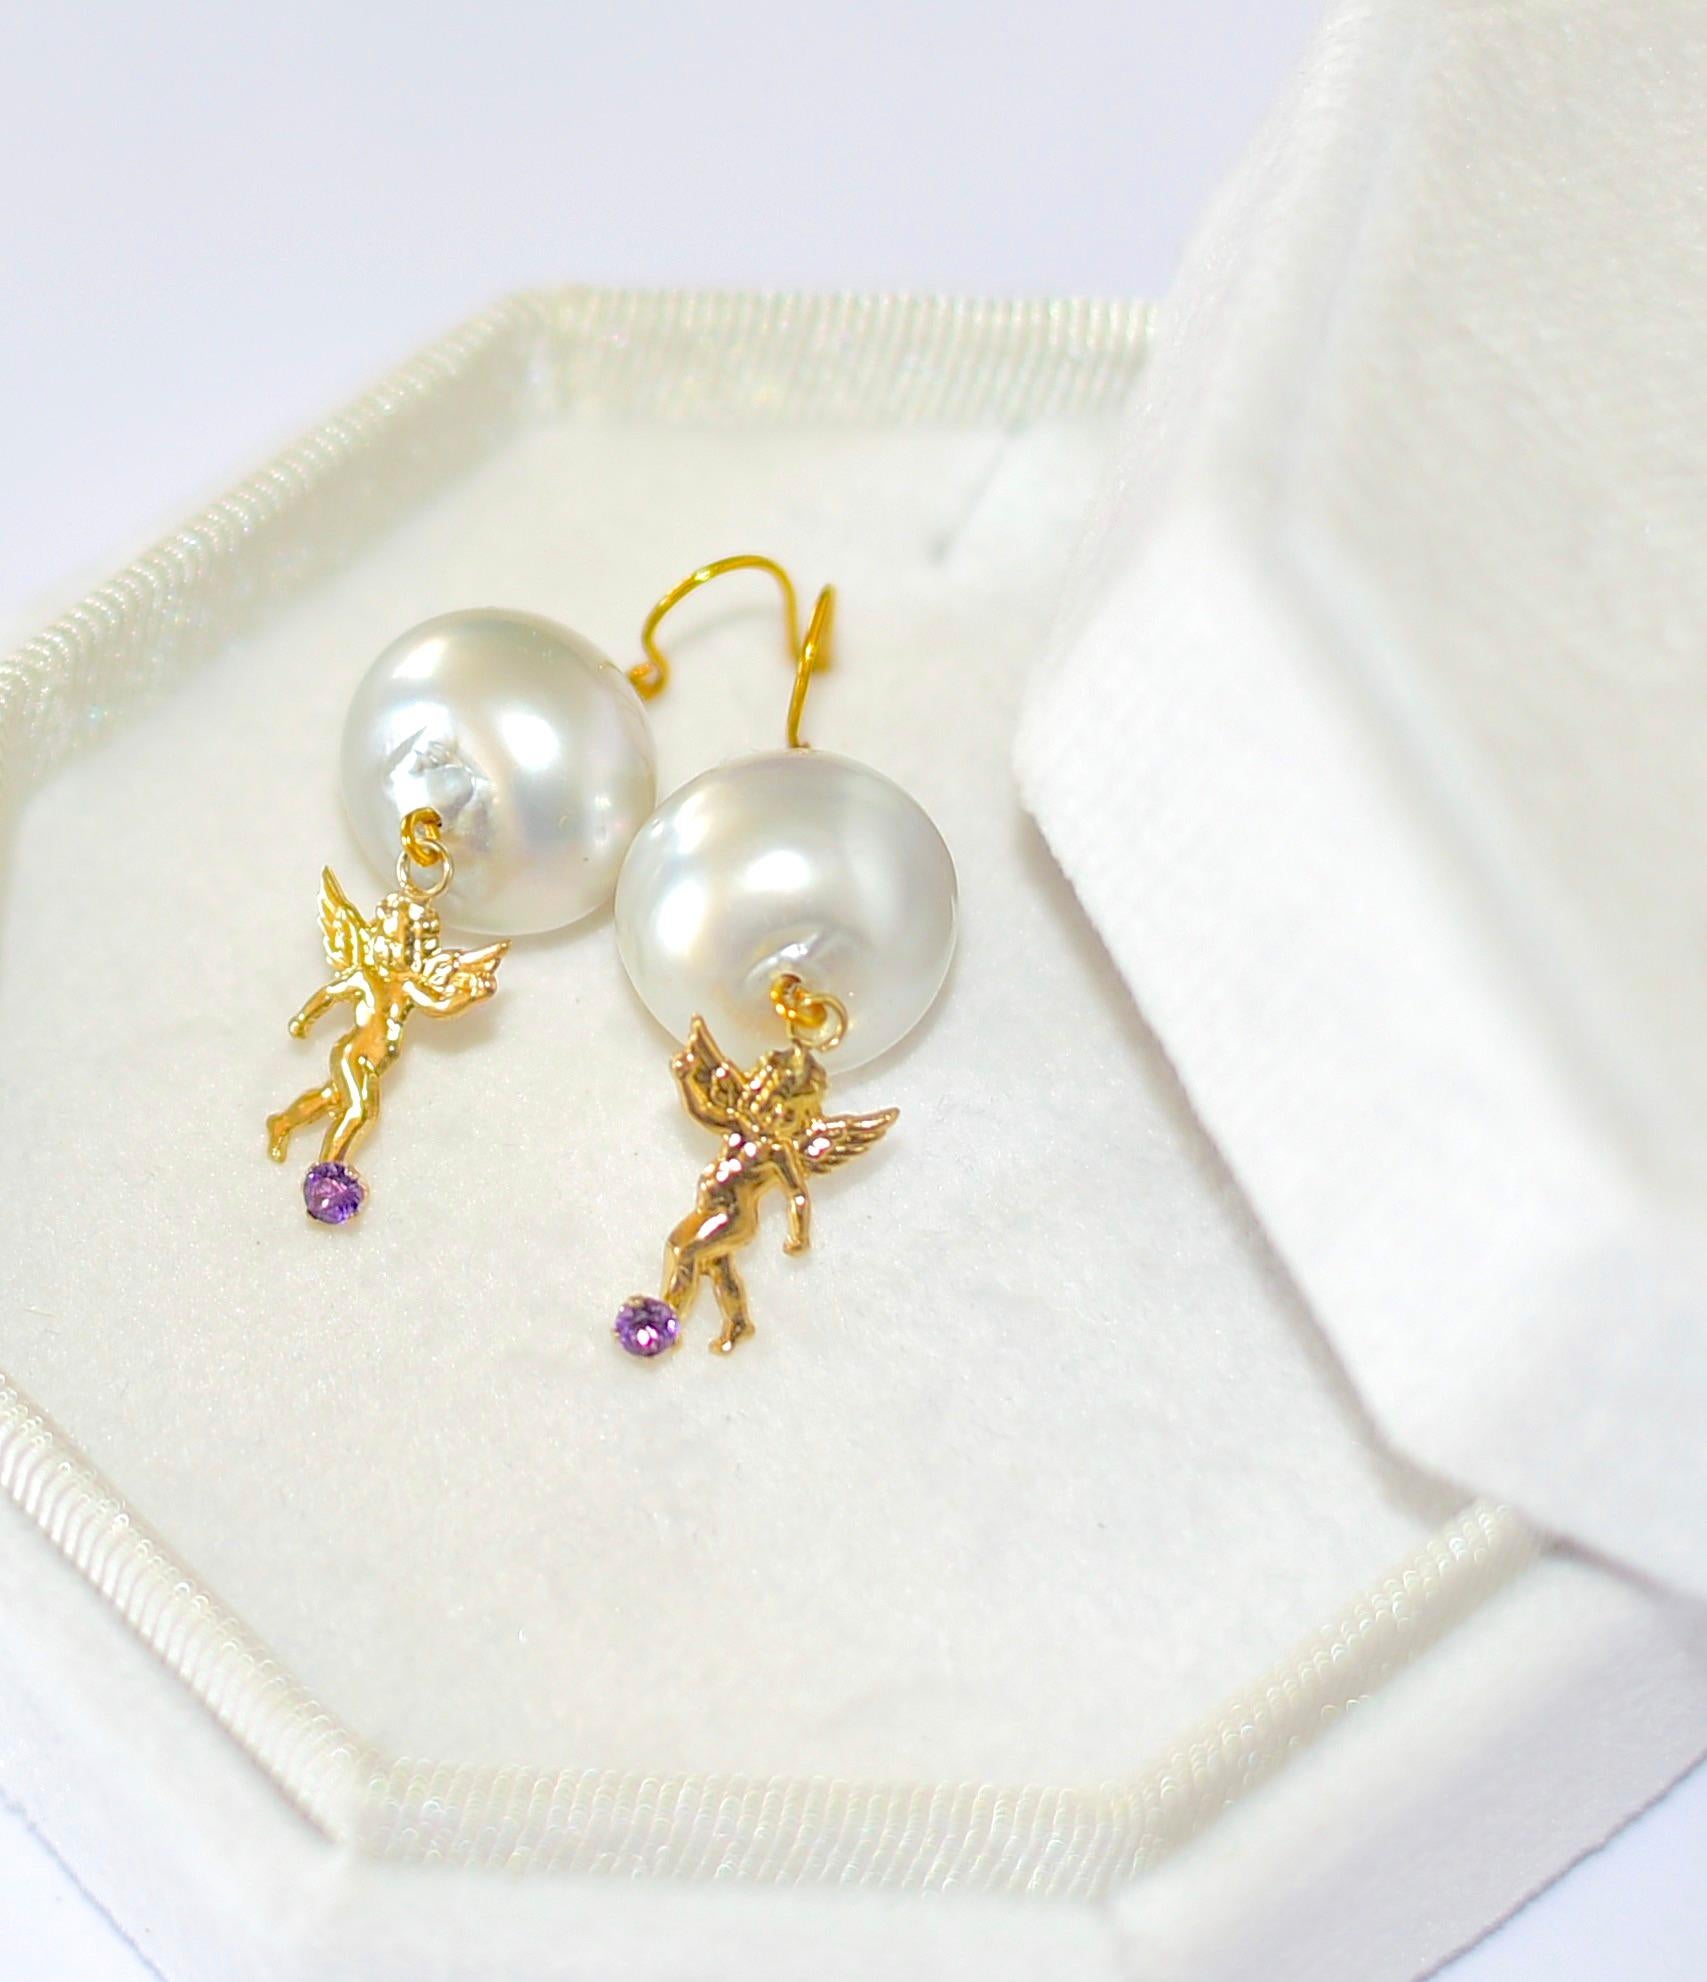 Australian Paspaley Cultured Pearl (14mm) with lovely 14K Solid Yellow Gold Angel with Amethyst. Absolutely stunning and lovely earrings for a special Lady, who loves meaningful jewelry, 
Earwire is 14K Solid Yellow Gold
Length 1.5 inches

Before